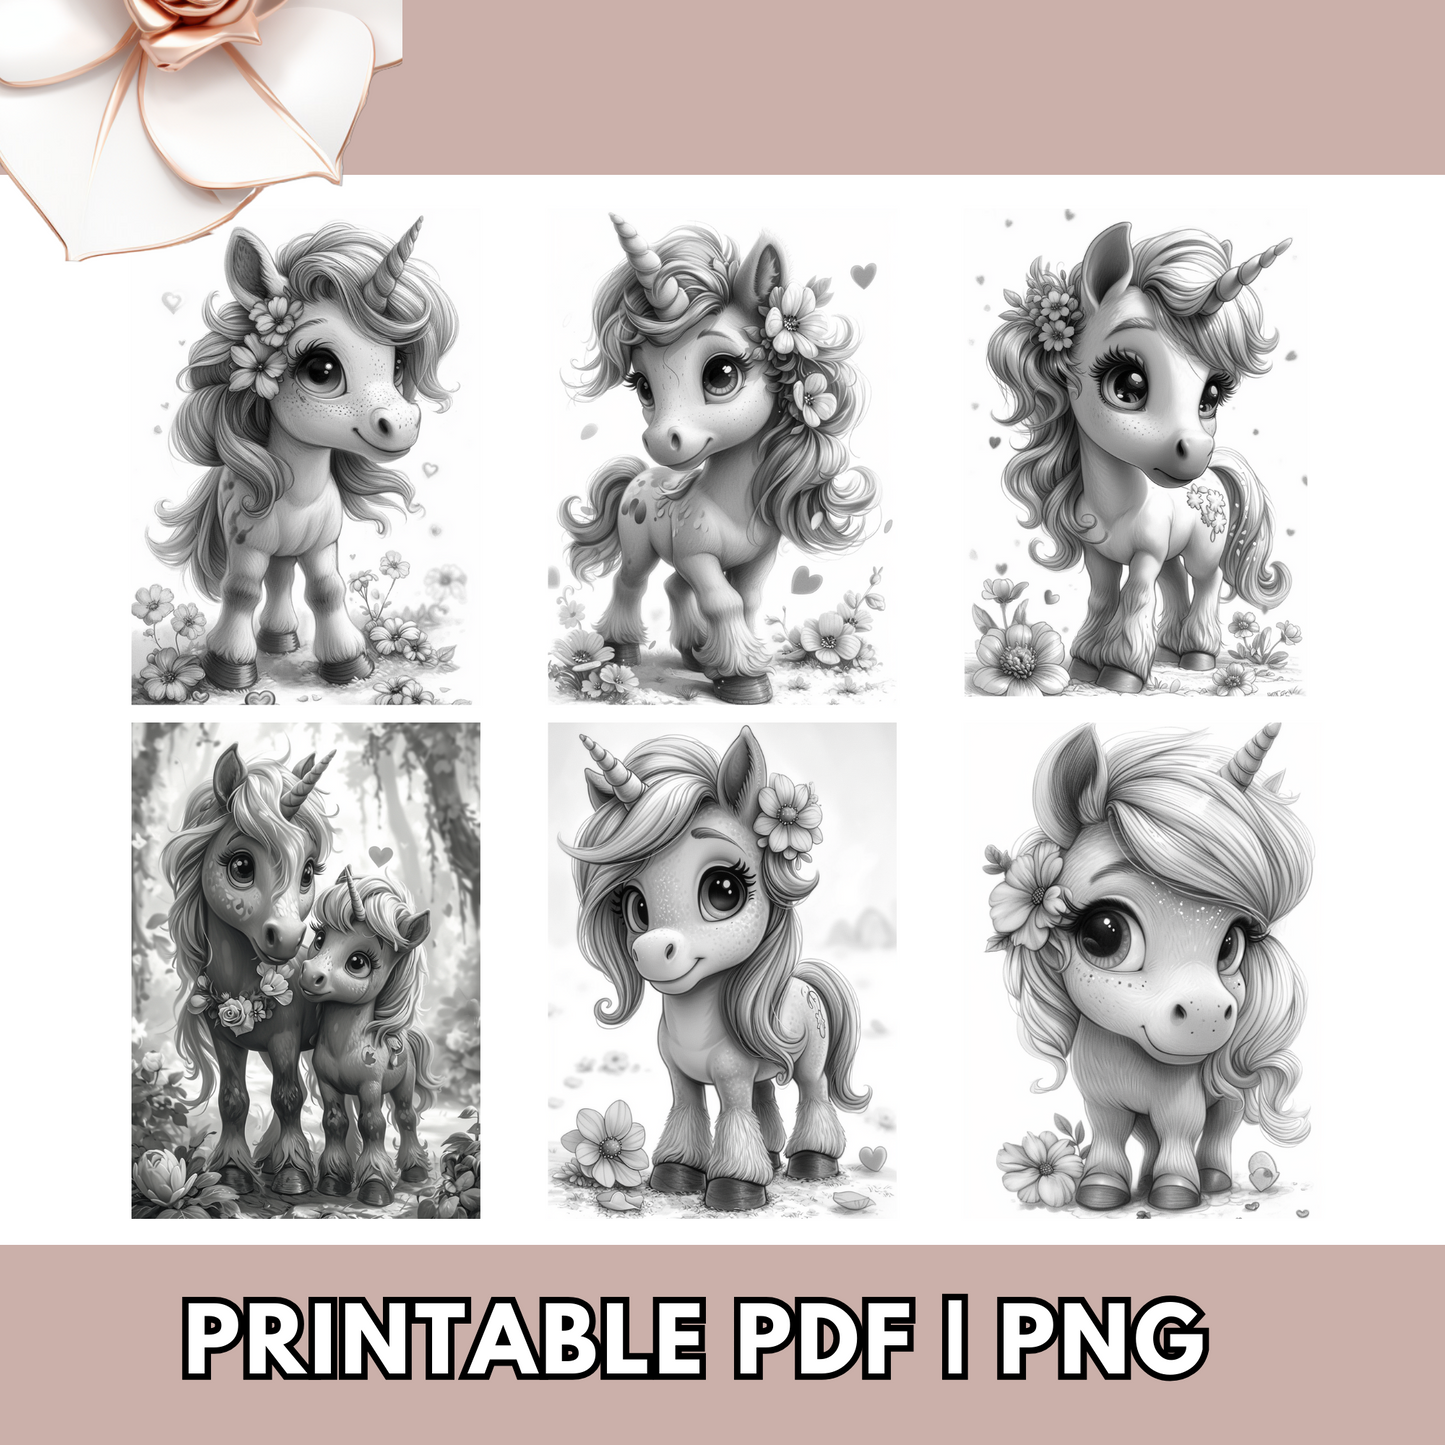 Valentines Coloring Cute Unicorns And Flowers Grayscale Available in Printable PDF, And PNG For Procreate Digital - Adults & Teens